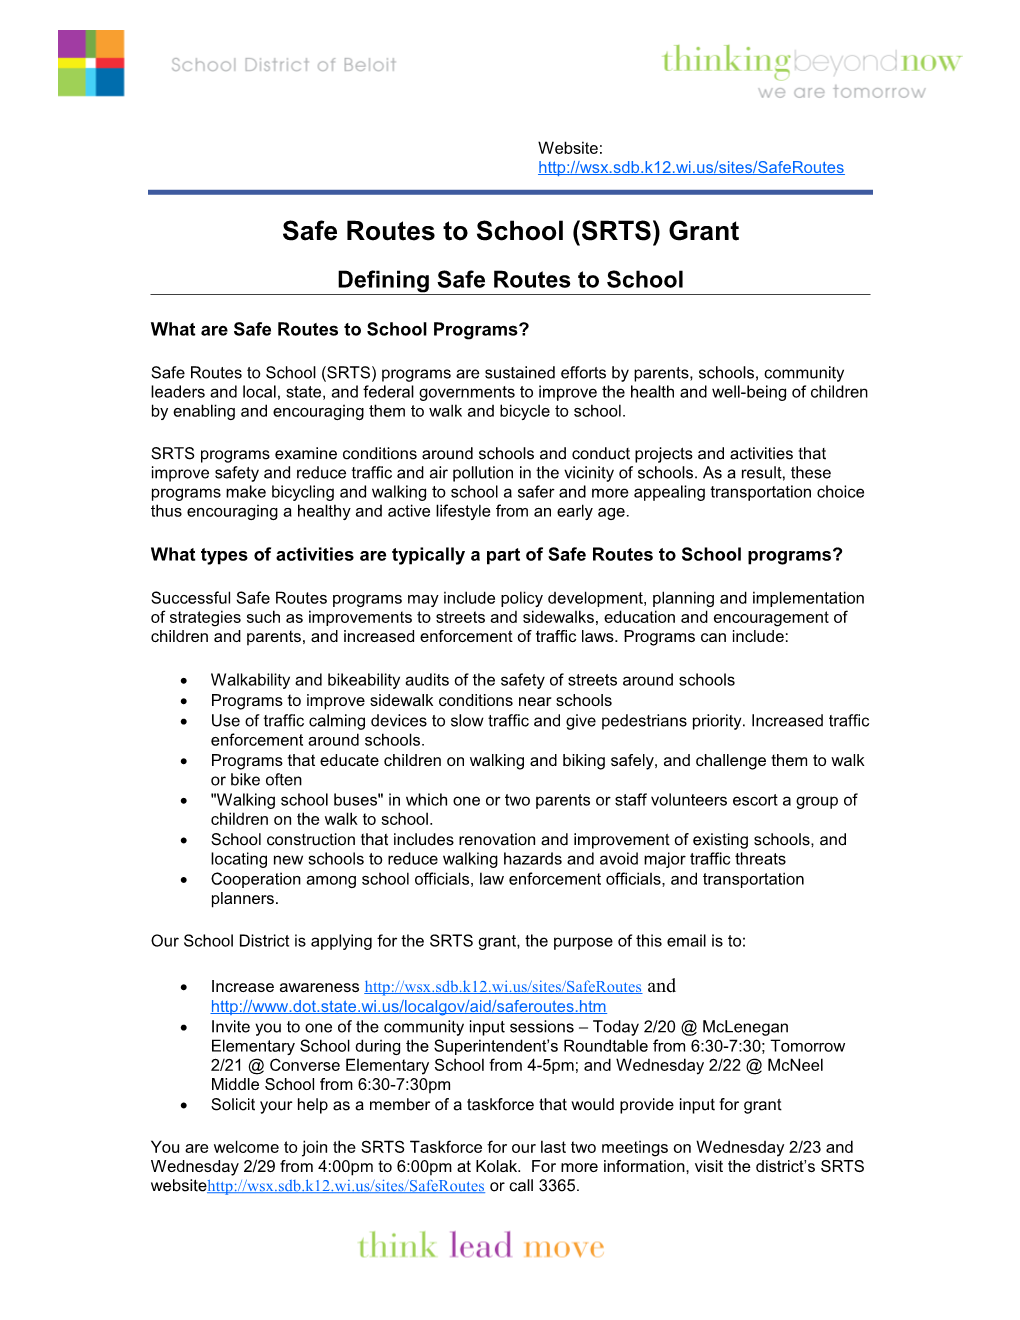 Safe Routes to School (SRTS) Grant